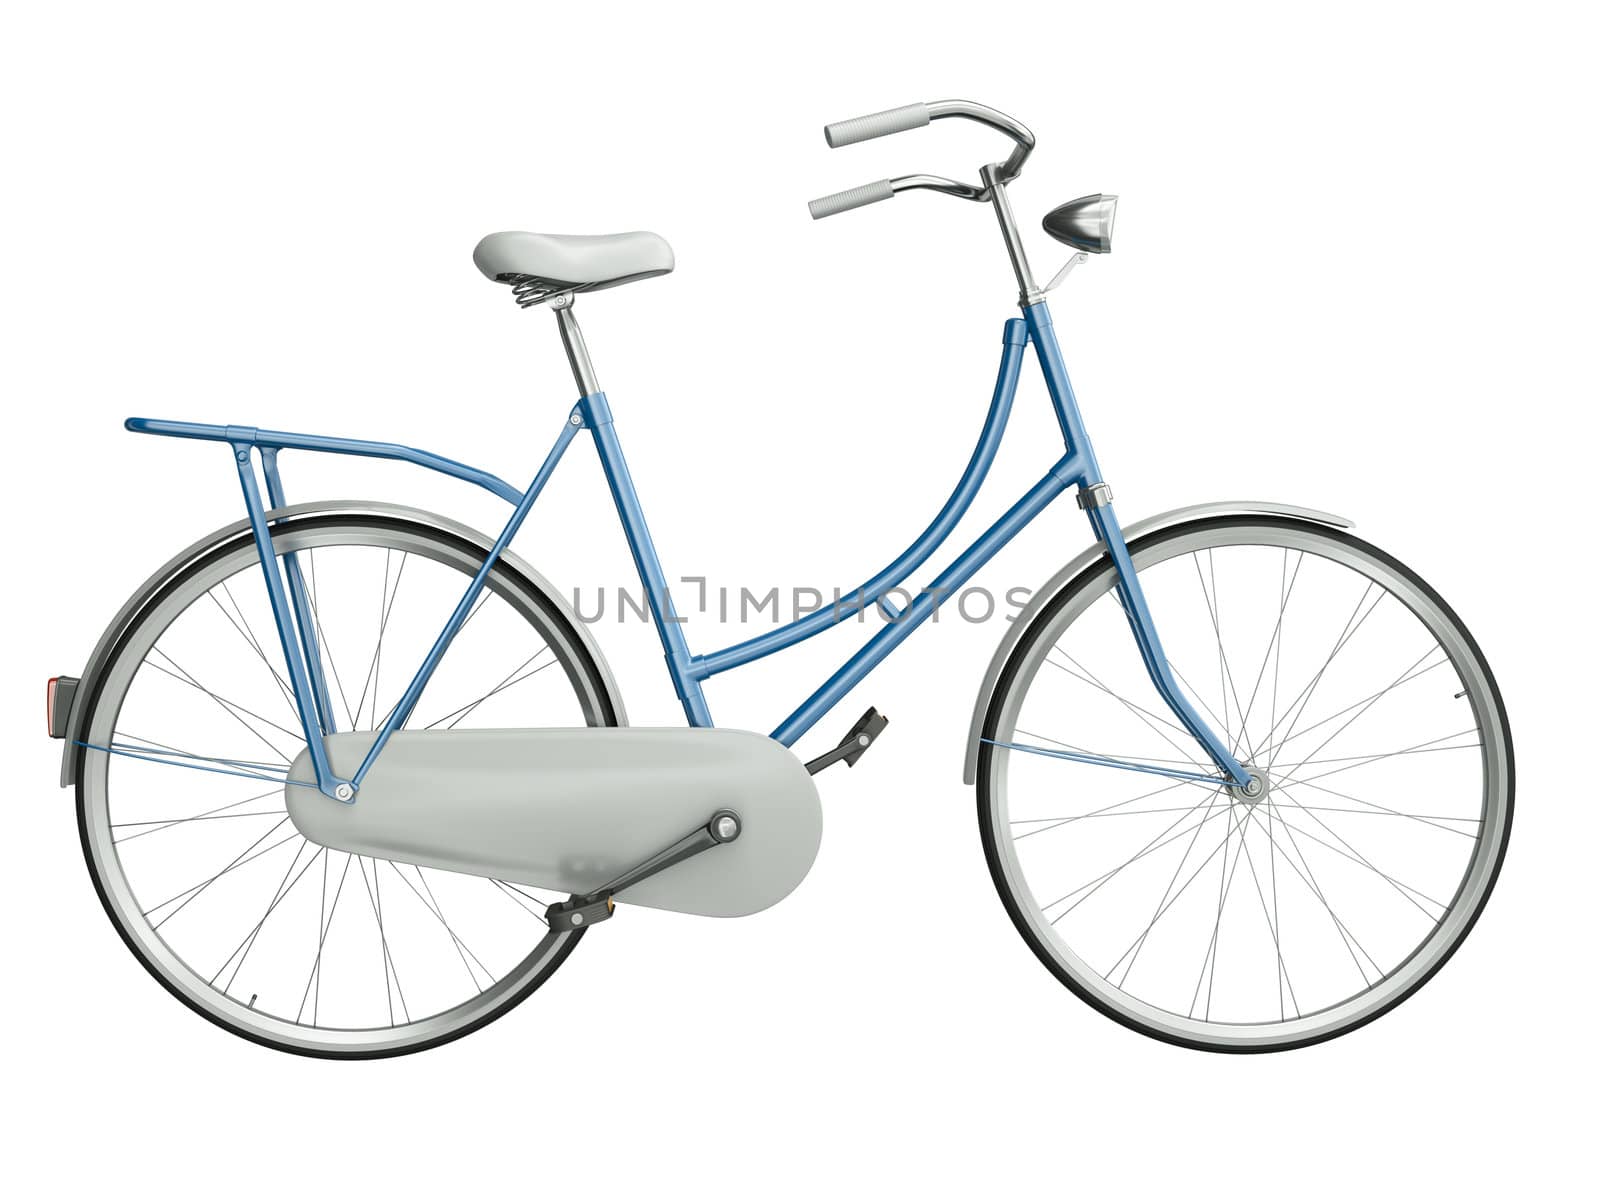 Blue bicycle isolated on white background. 3D render.